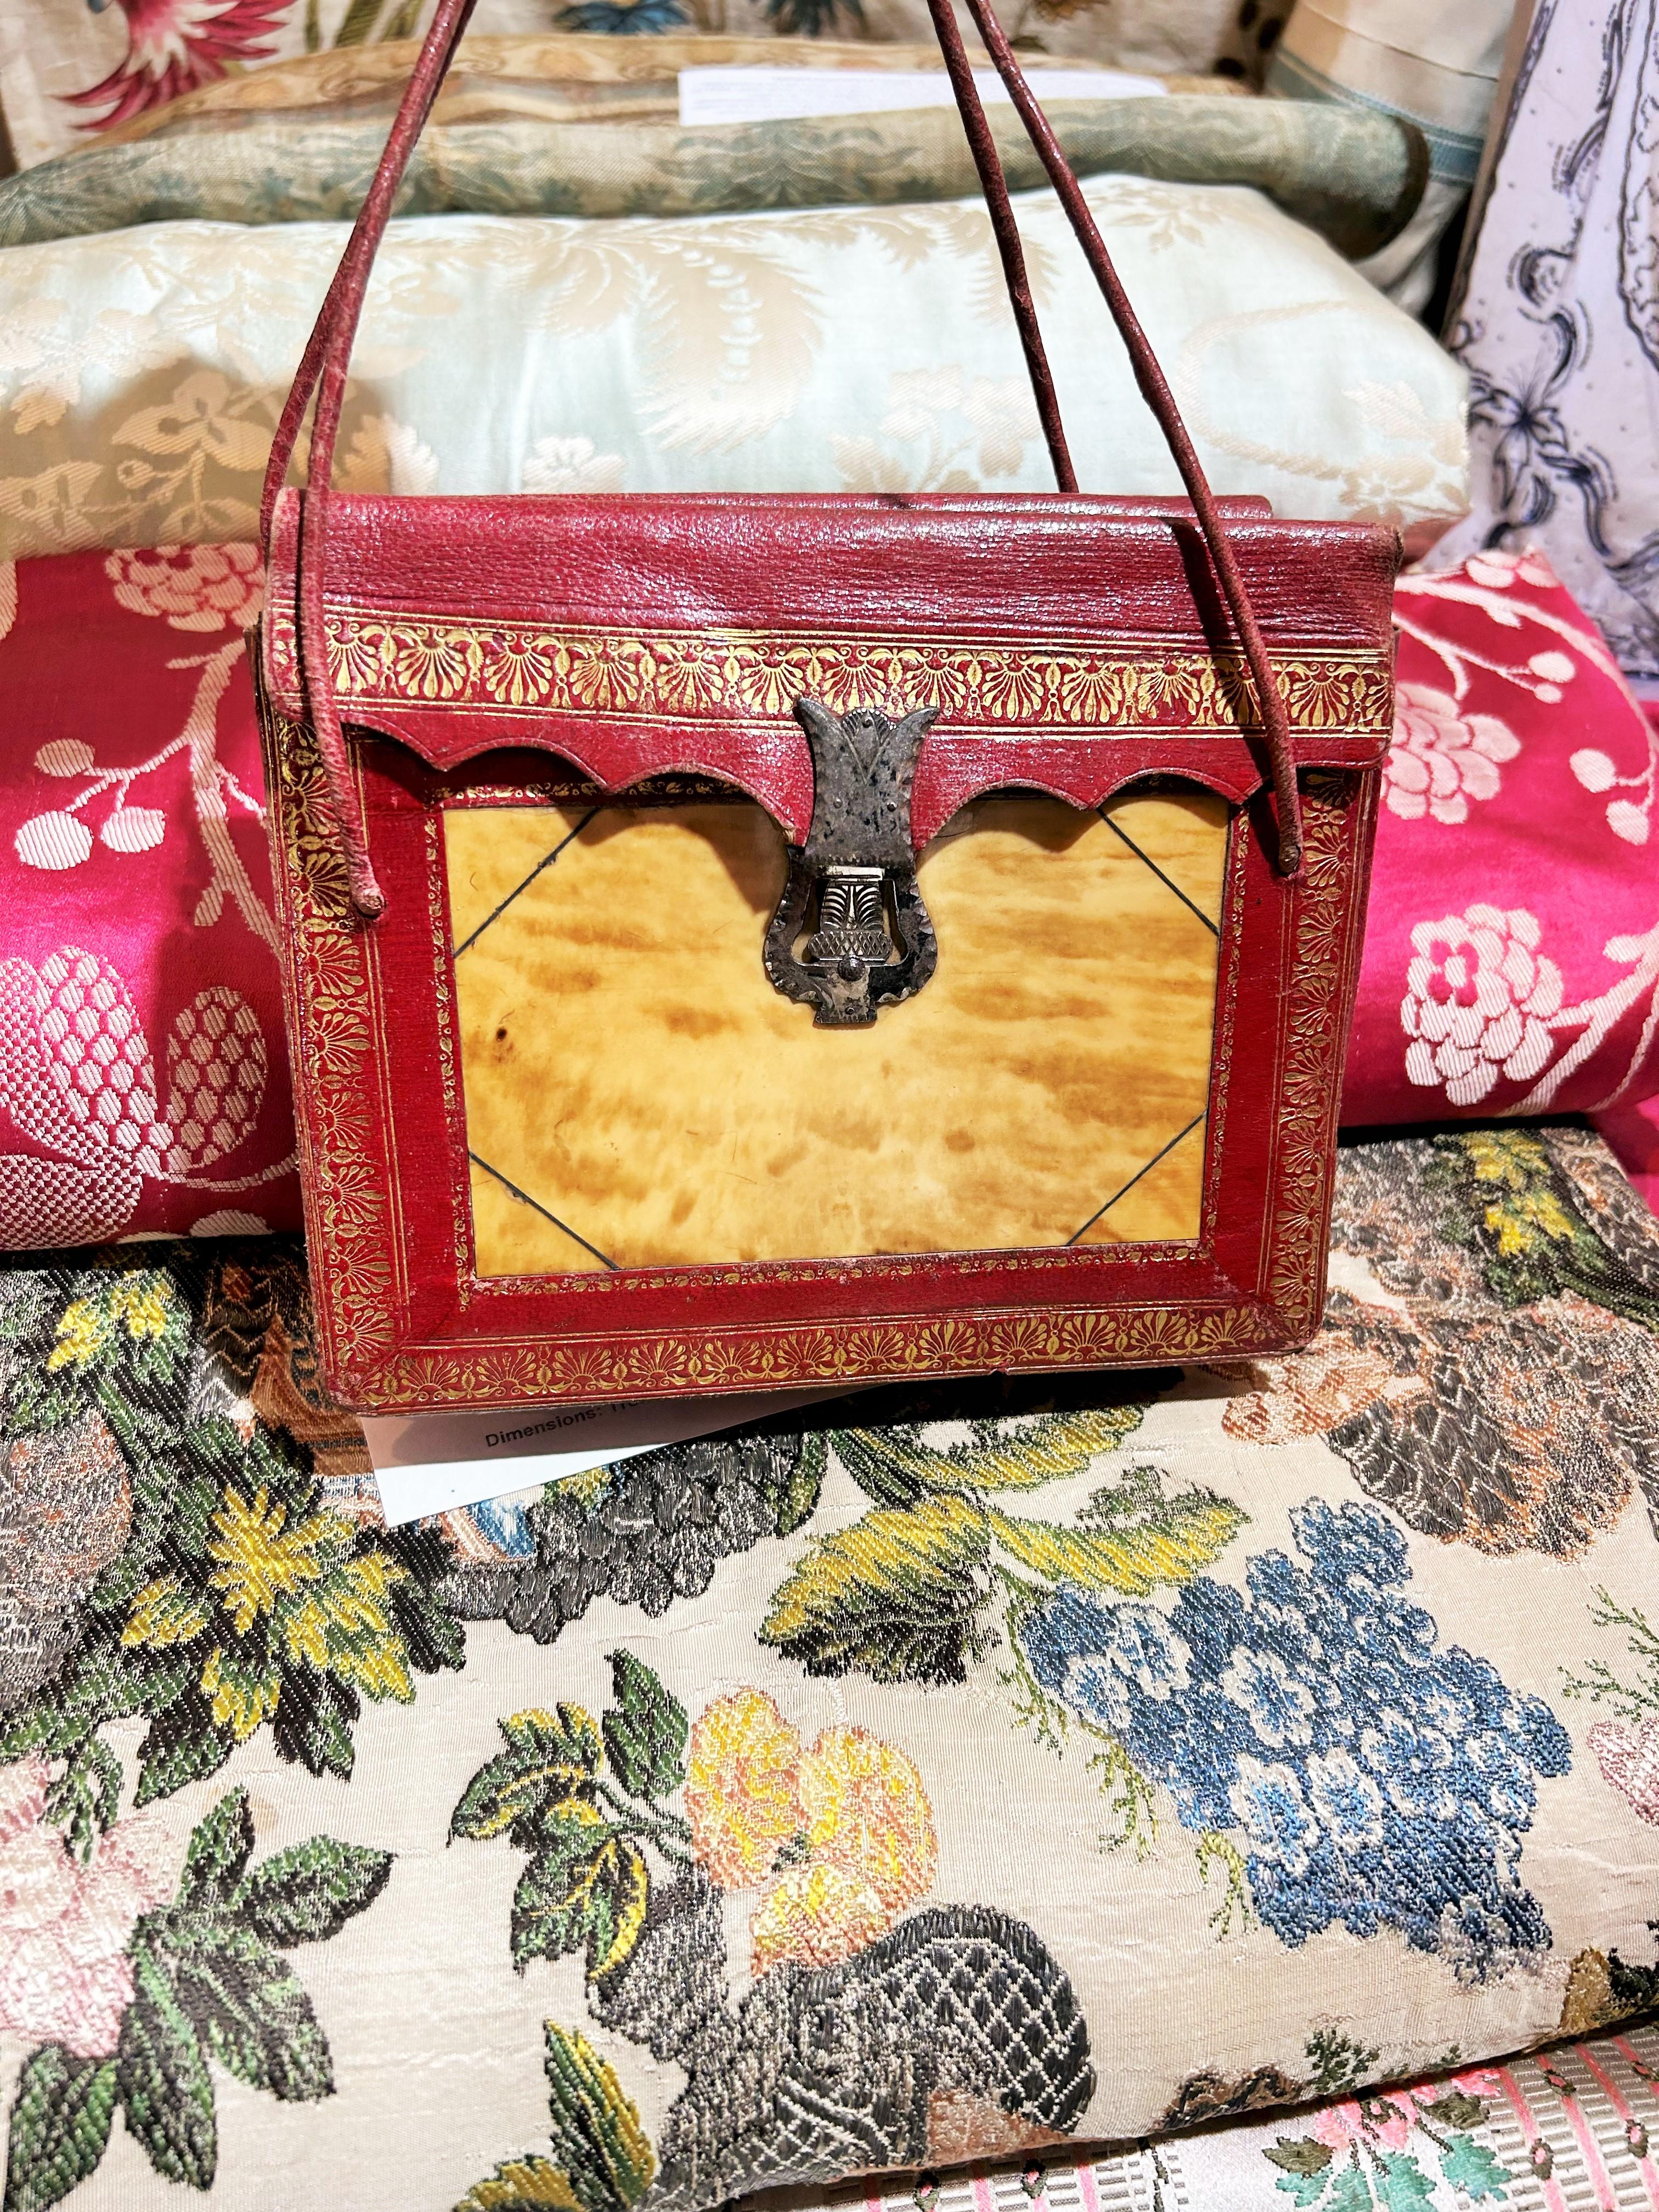 A precious red Leather Reticule with tortoiseshell inlay - England Dated 1836 For Sale 11